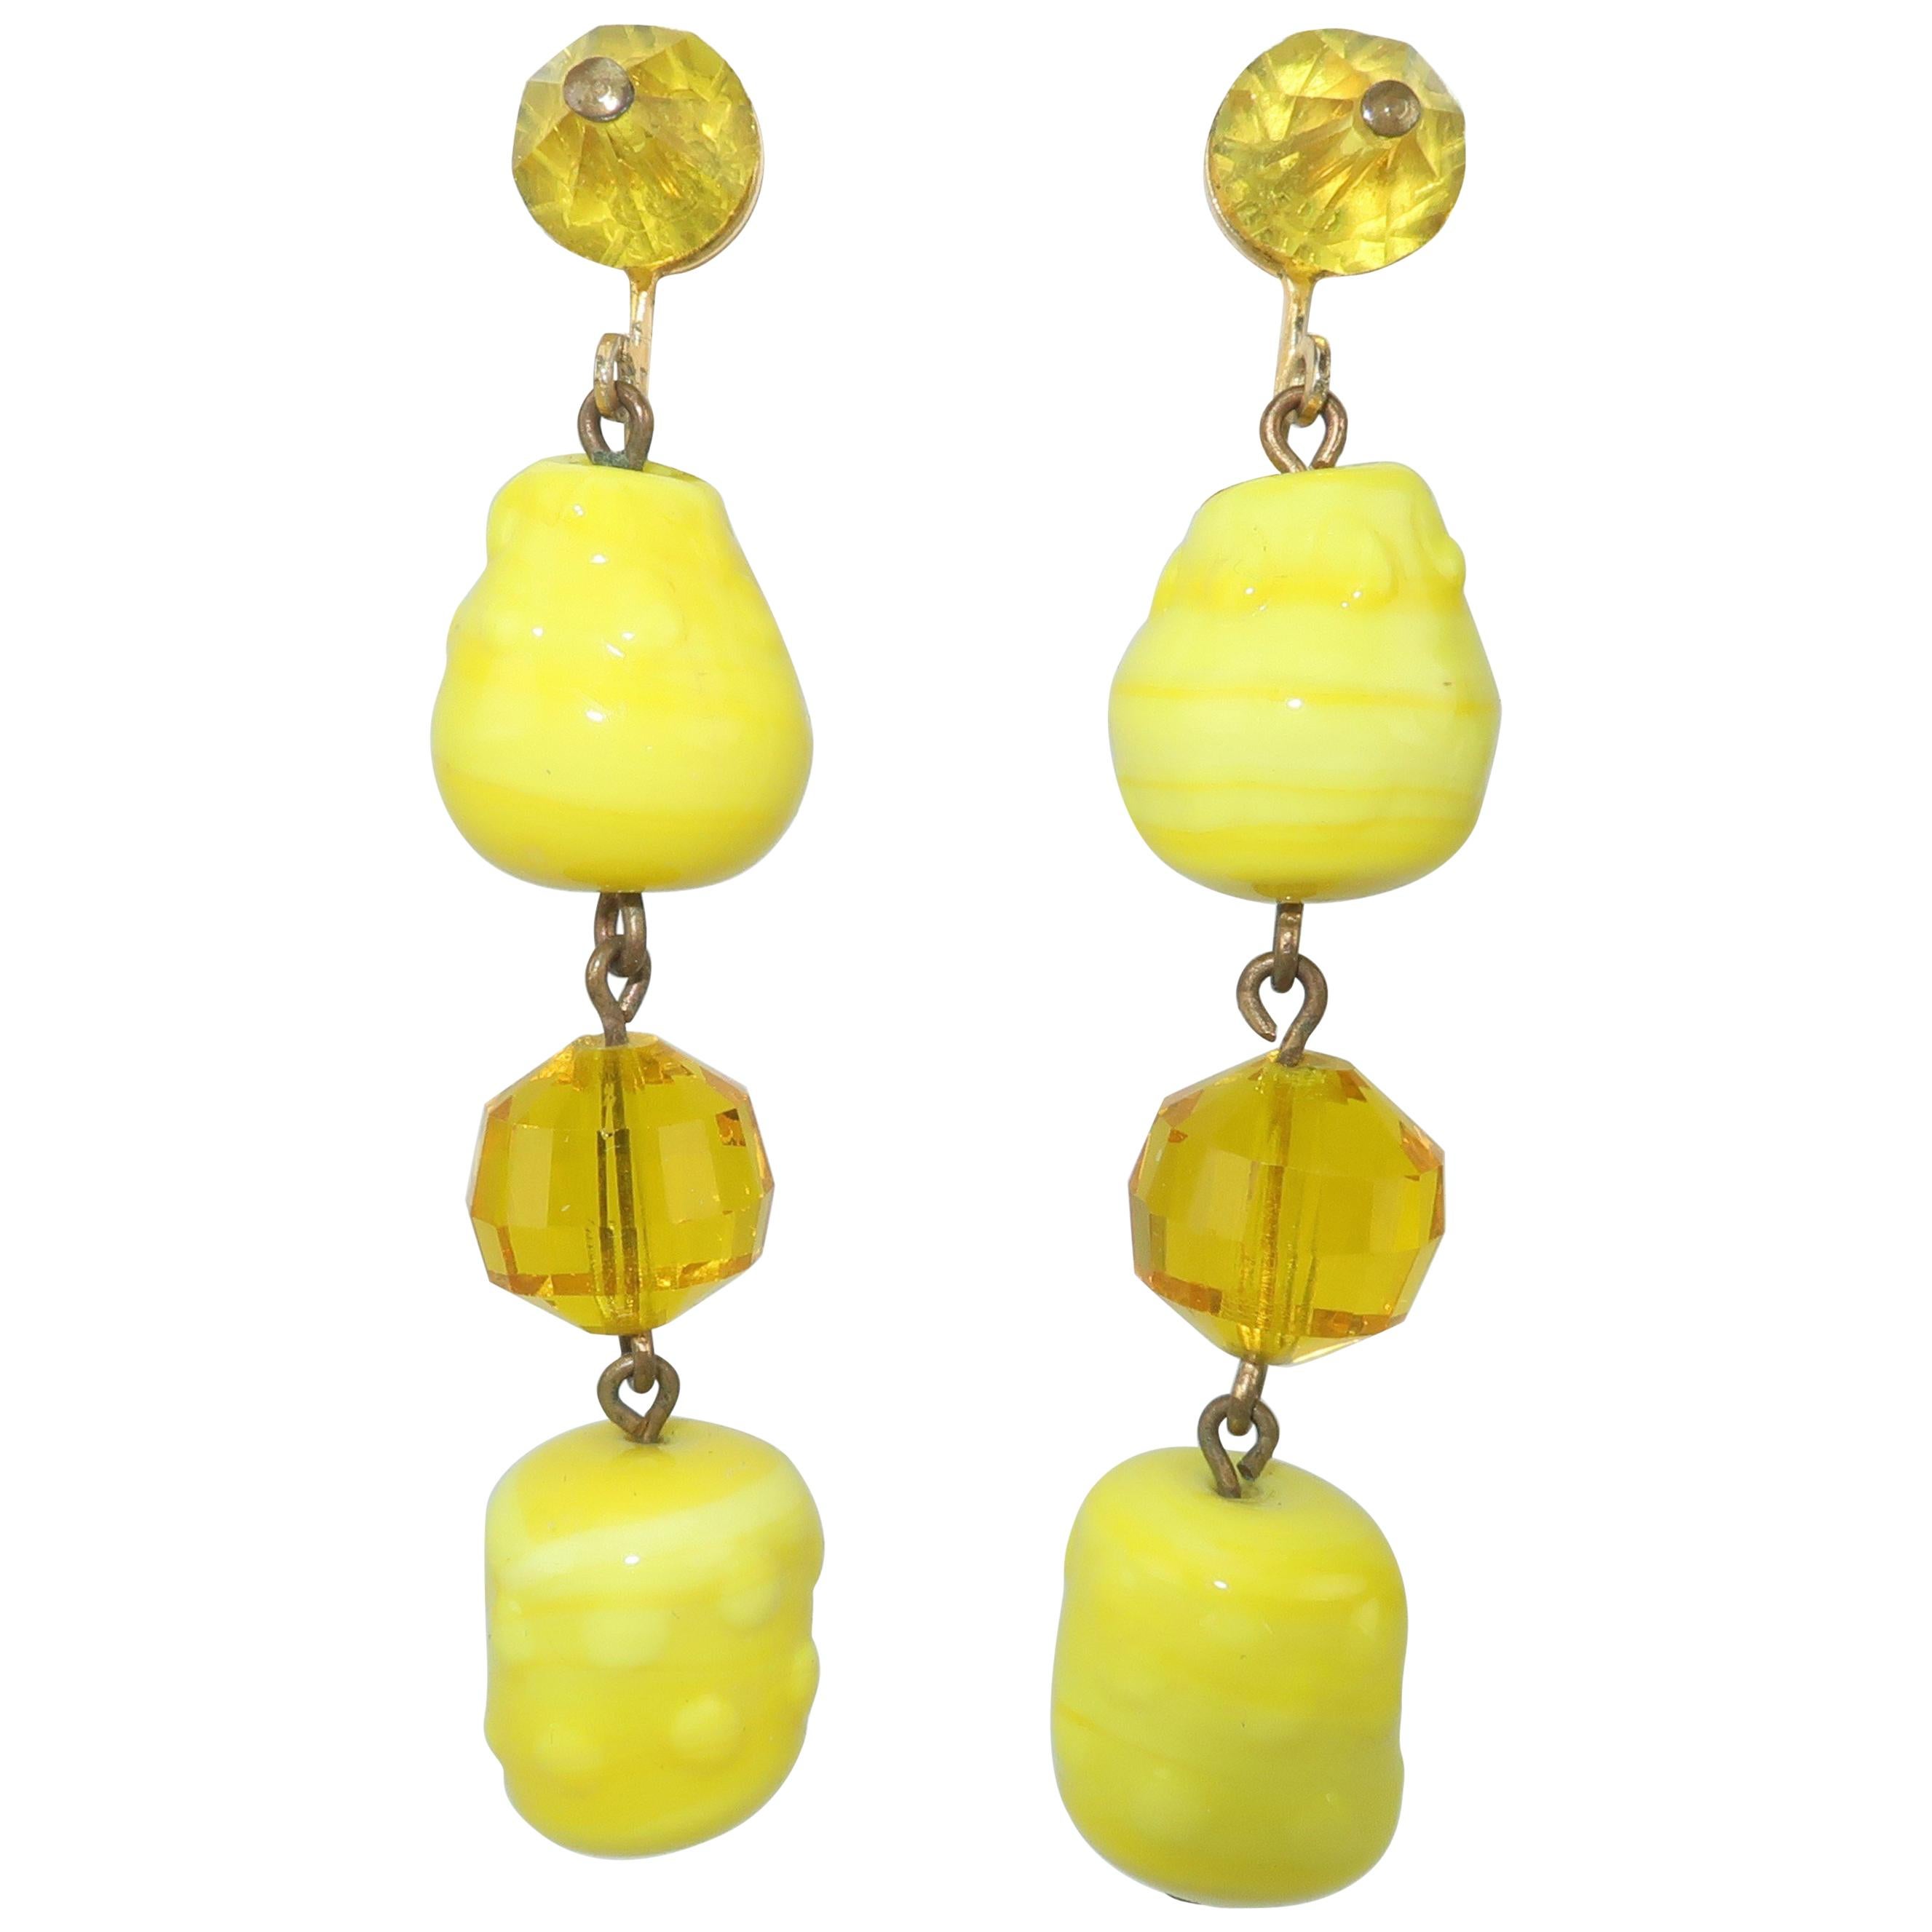 Vogue Jewelry Yellow and Amber Glass Dangle Earrings, circa 1960